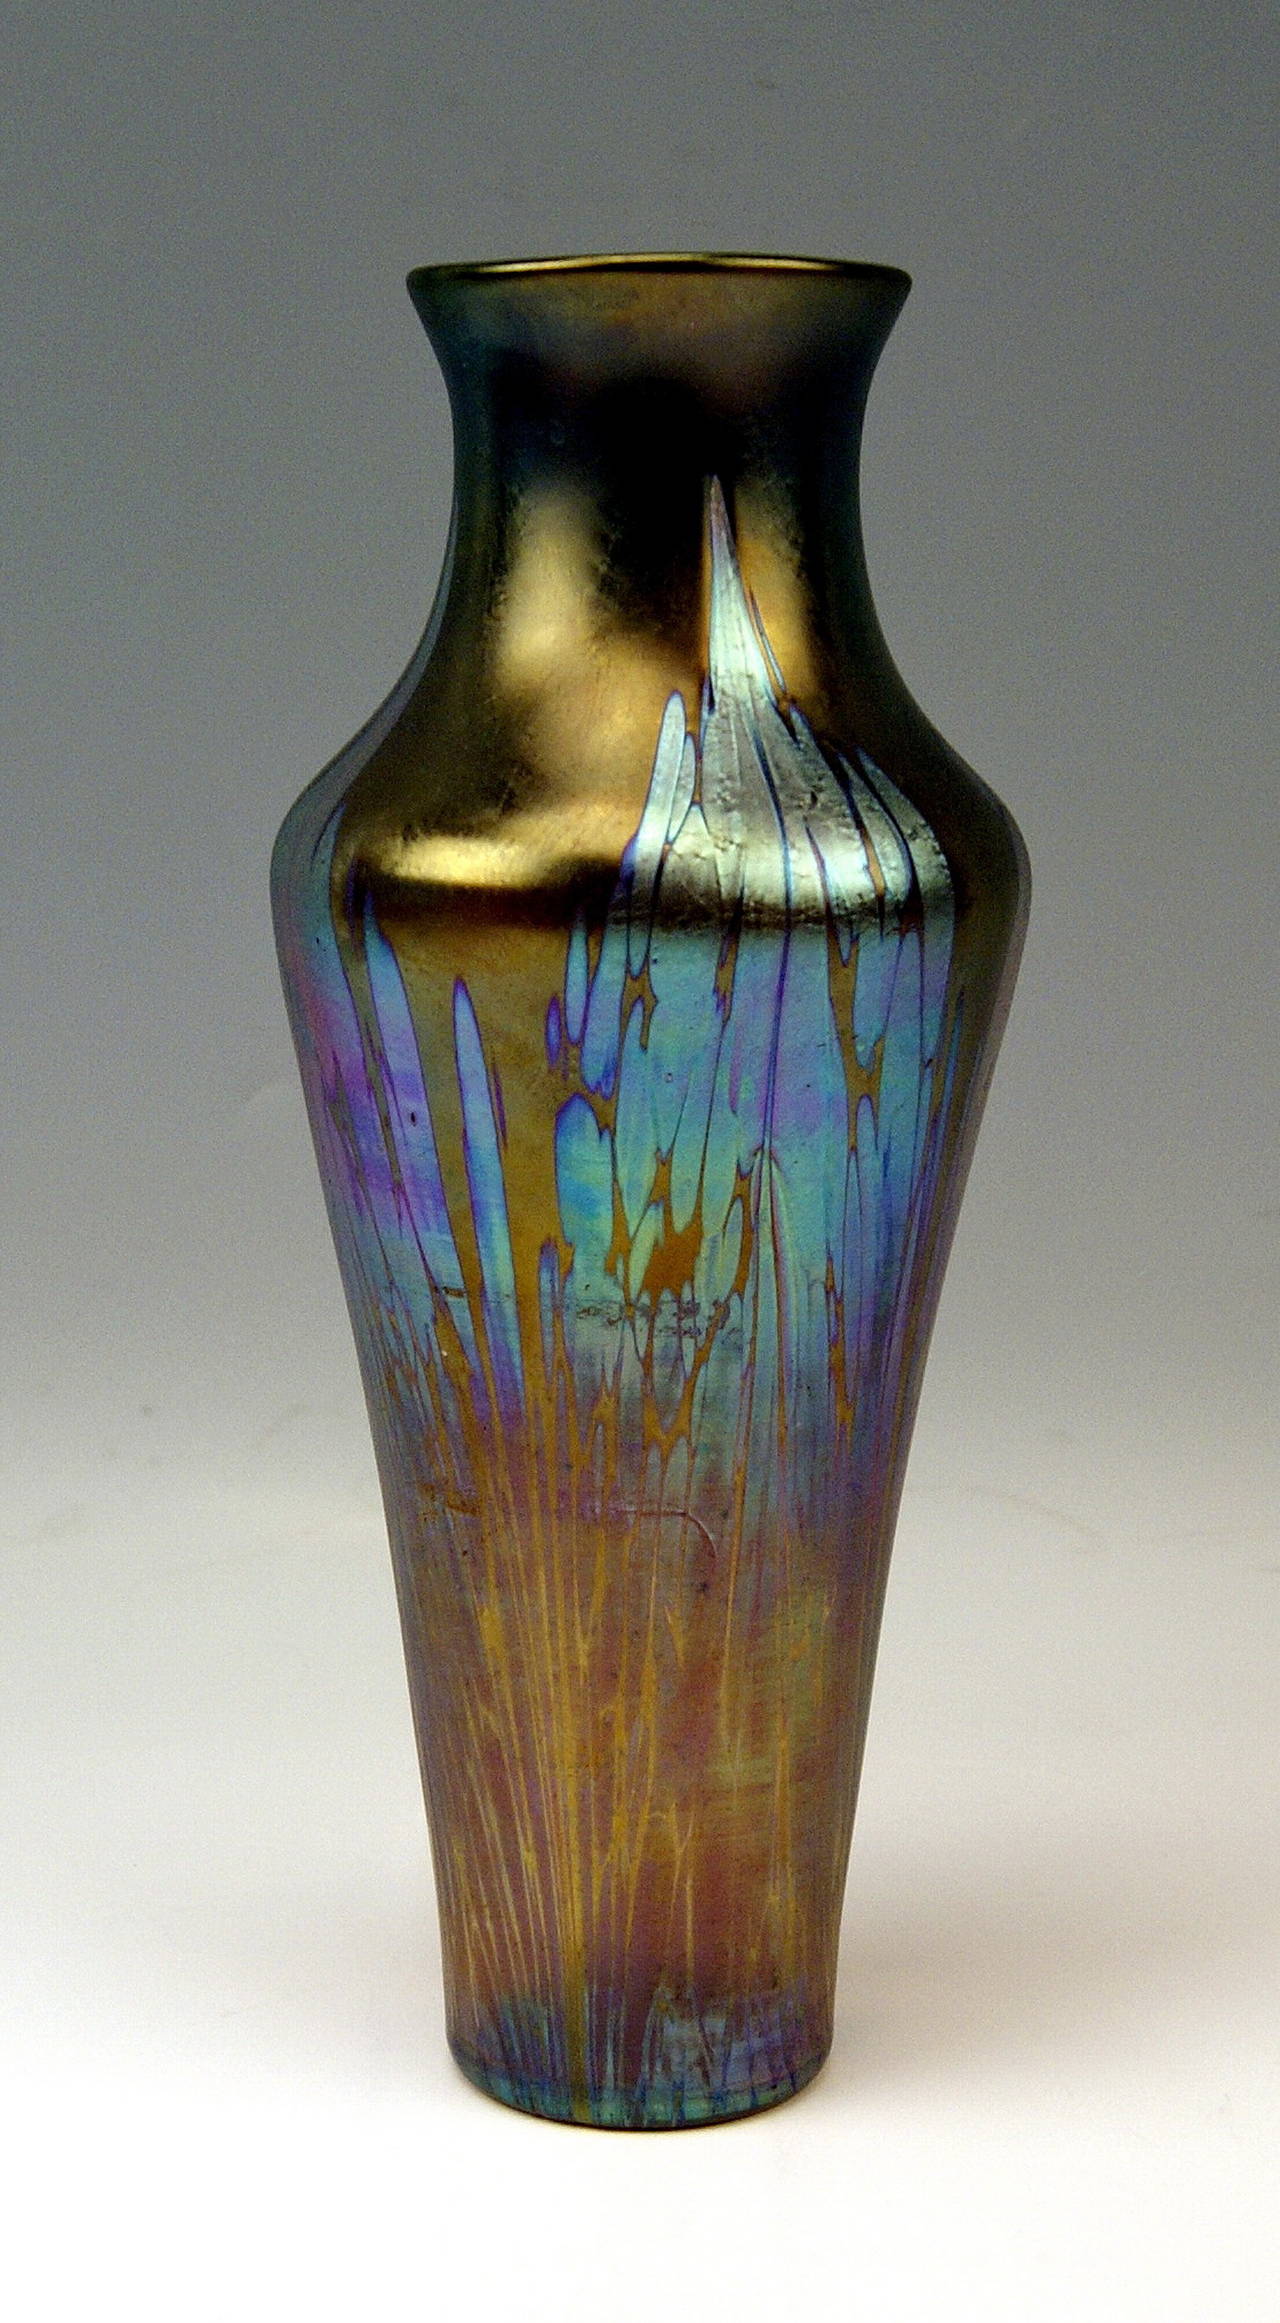 Gorgeous Vase Loetz Widow Art Nouveau 

Made by Loetz, Klostermuehle   circa  1900 / 05
Decor:   Phaenomen Gre 2/484 Medici / Glass shaded in Spreading Chestnut Brown

This finest Loetz Art Nouveau Vase is of oblong as well as of tapering form